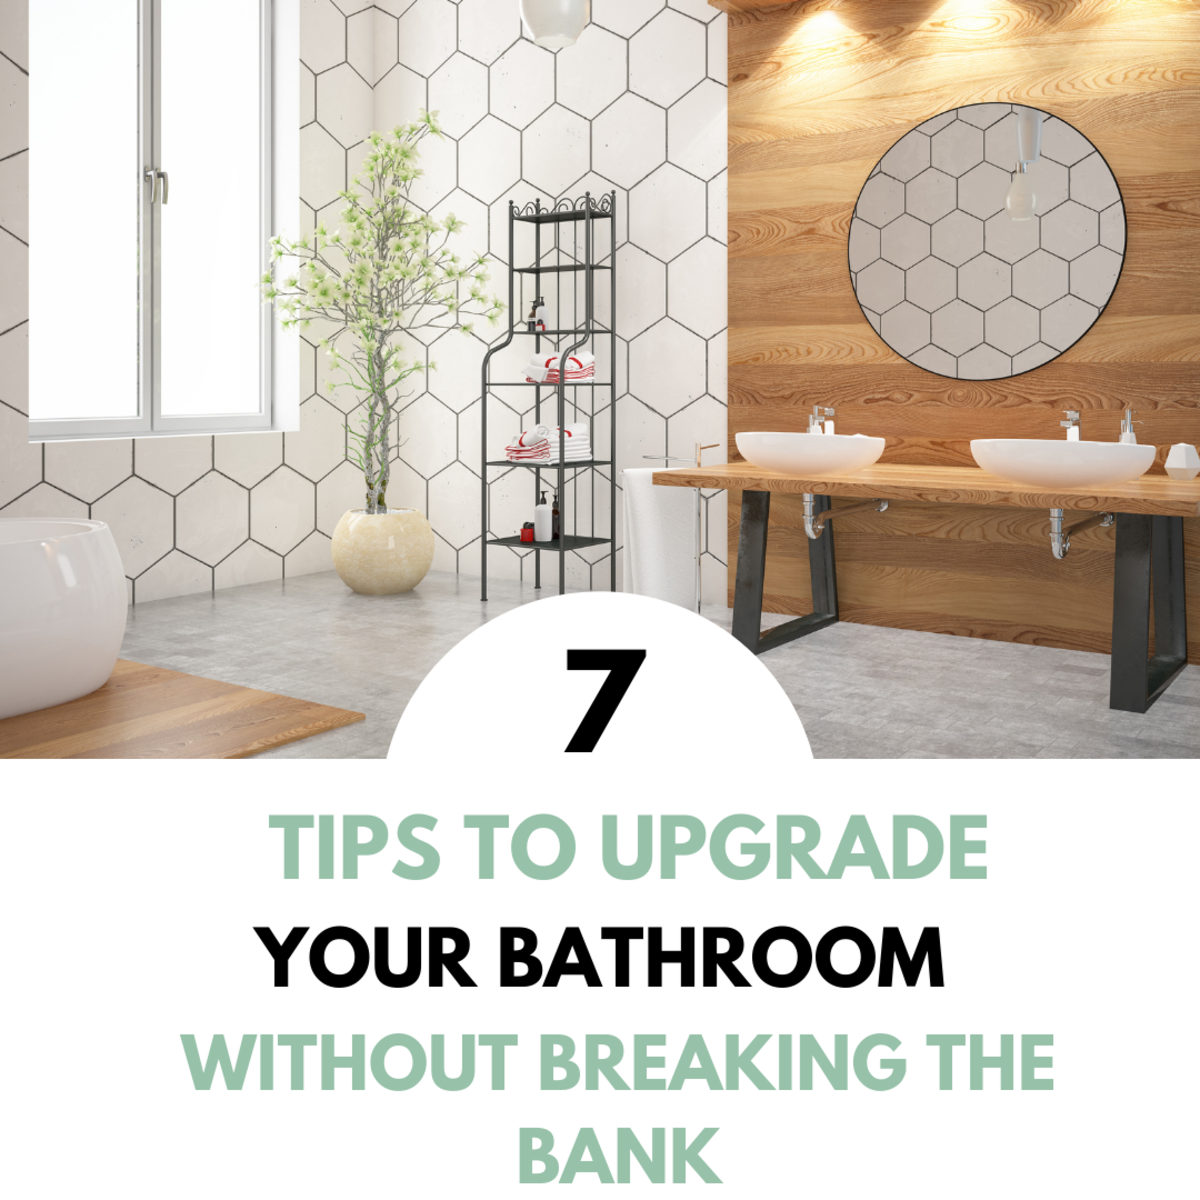 Seven Tips to Upgrade Your Bathroom Without Breaking the Bank